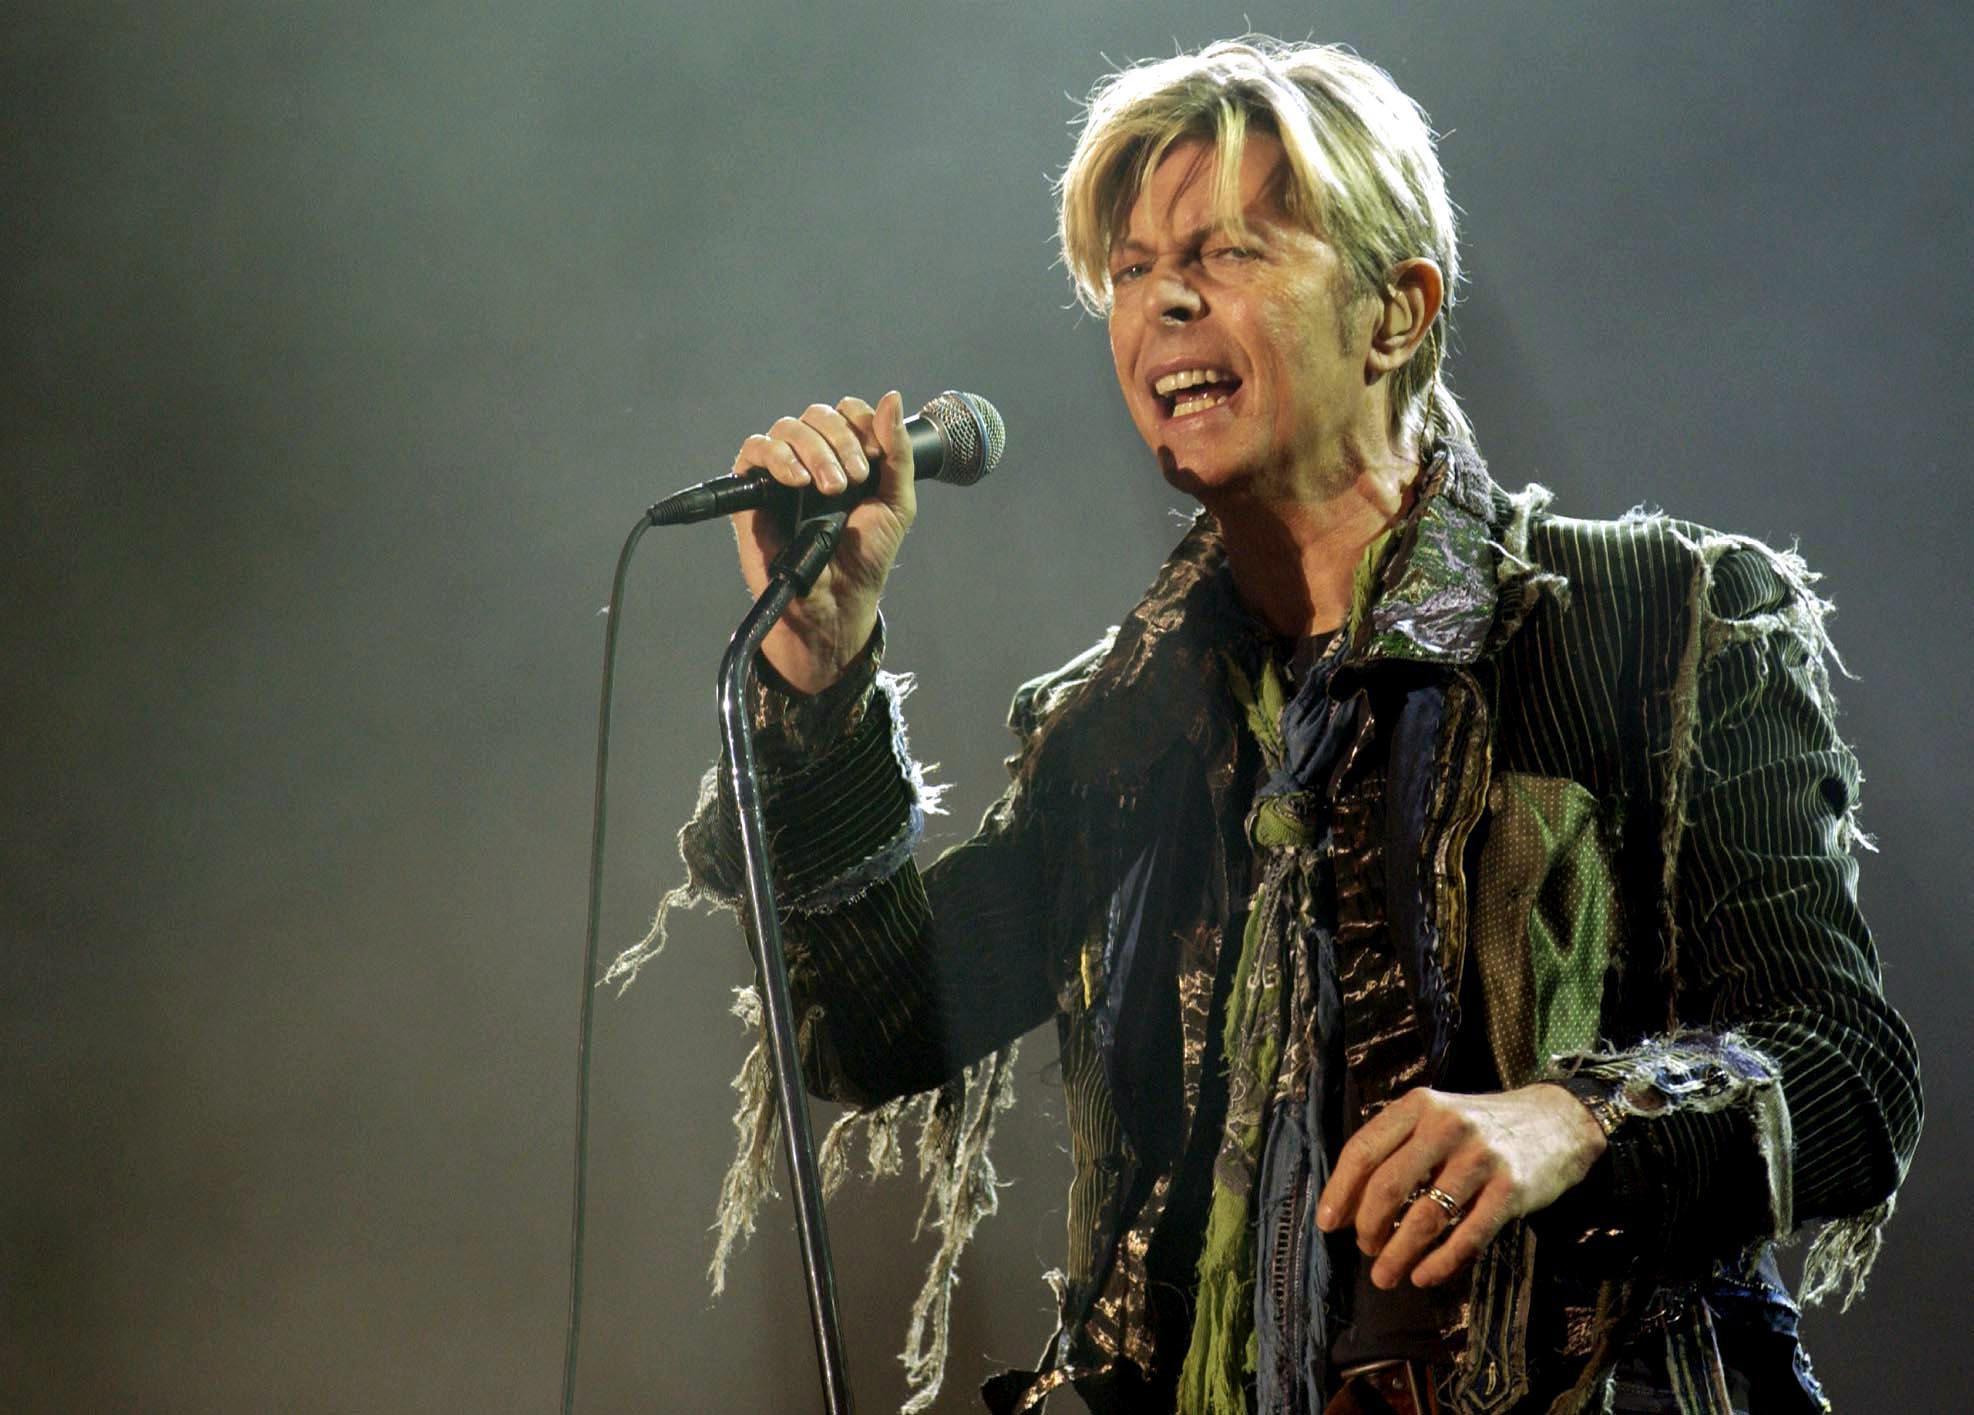 File photo of David Bowie dated June 13, 2004.